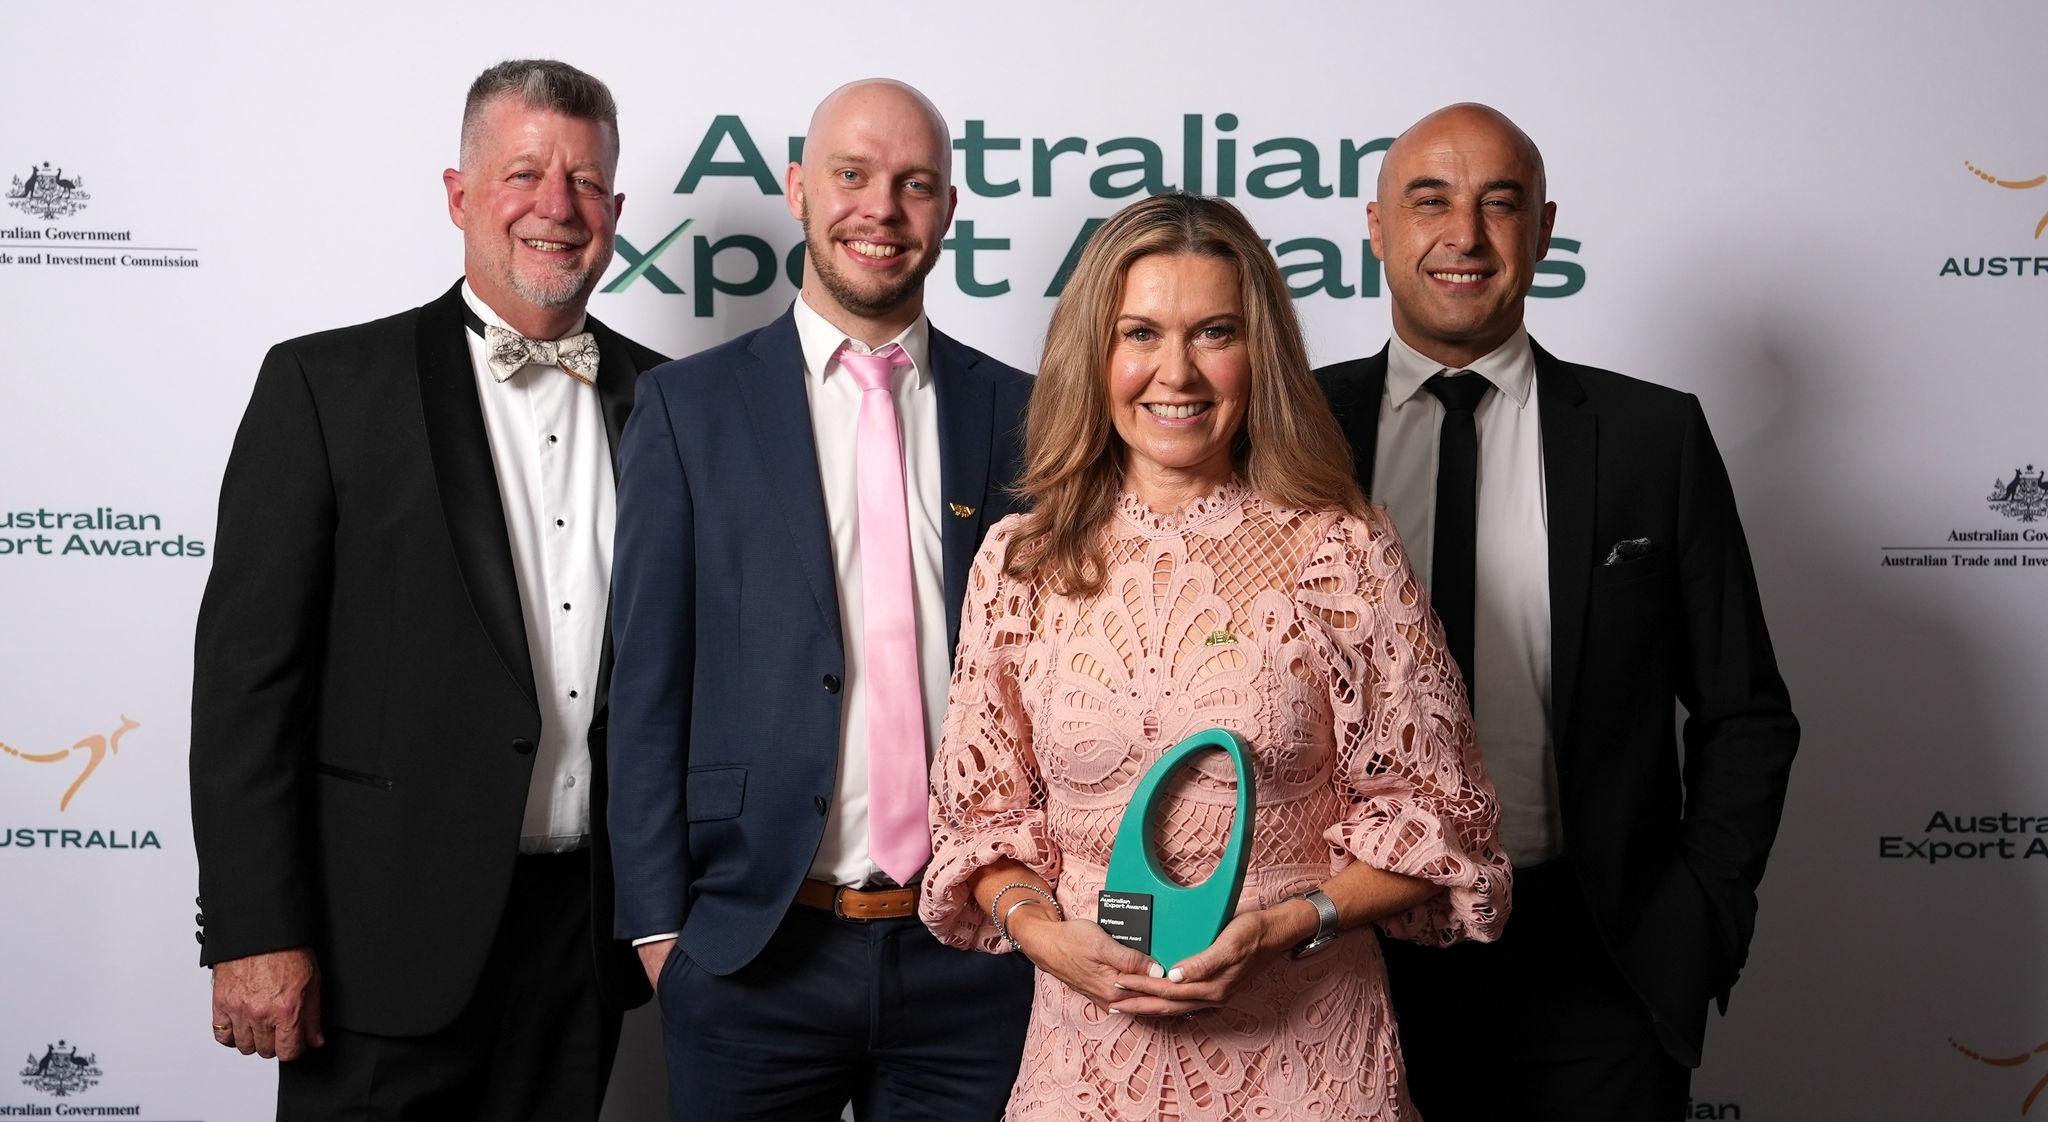 Four MyVenue Team Members are pictured smiling in front of the 2023 Australian Export Awards Banner. One team member is carrying a trophy.